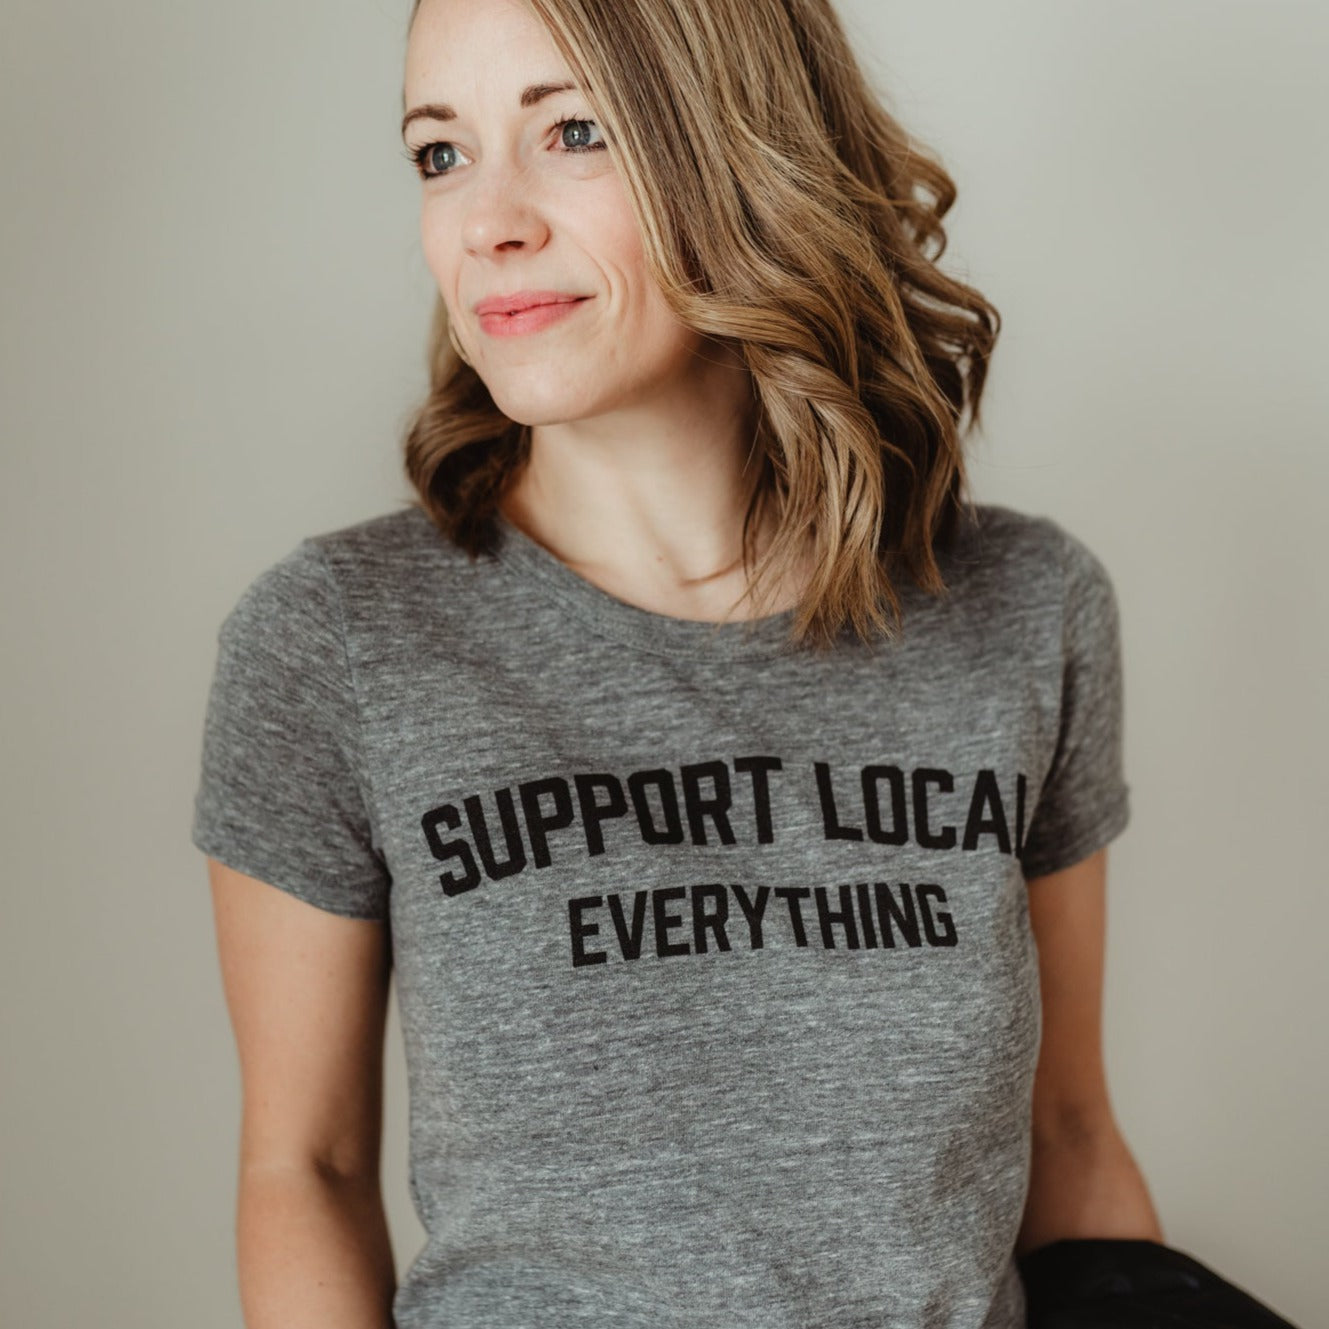 Support Local Everything Tee. Heather Grey.